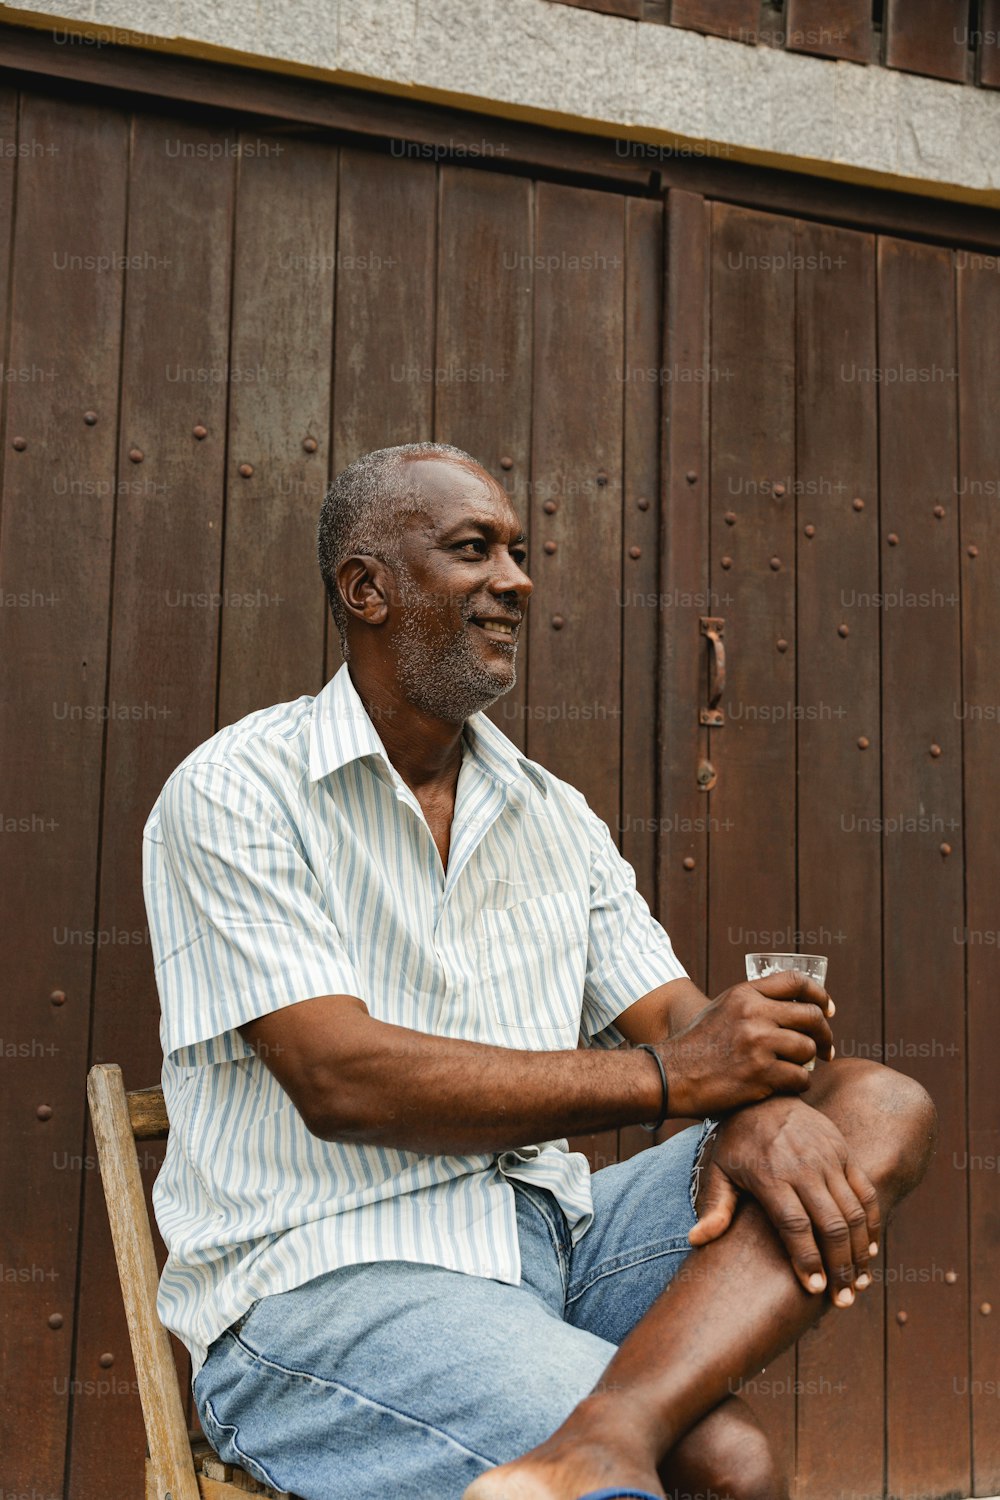 a man sitting on a wooden chair holding a glass of wine